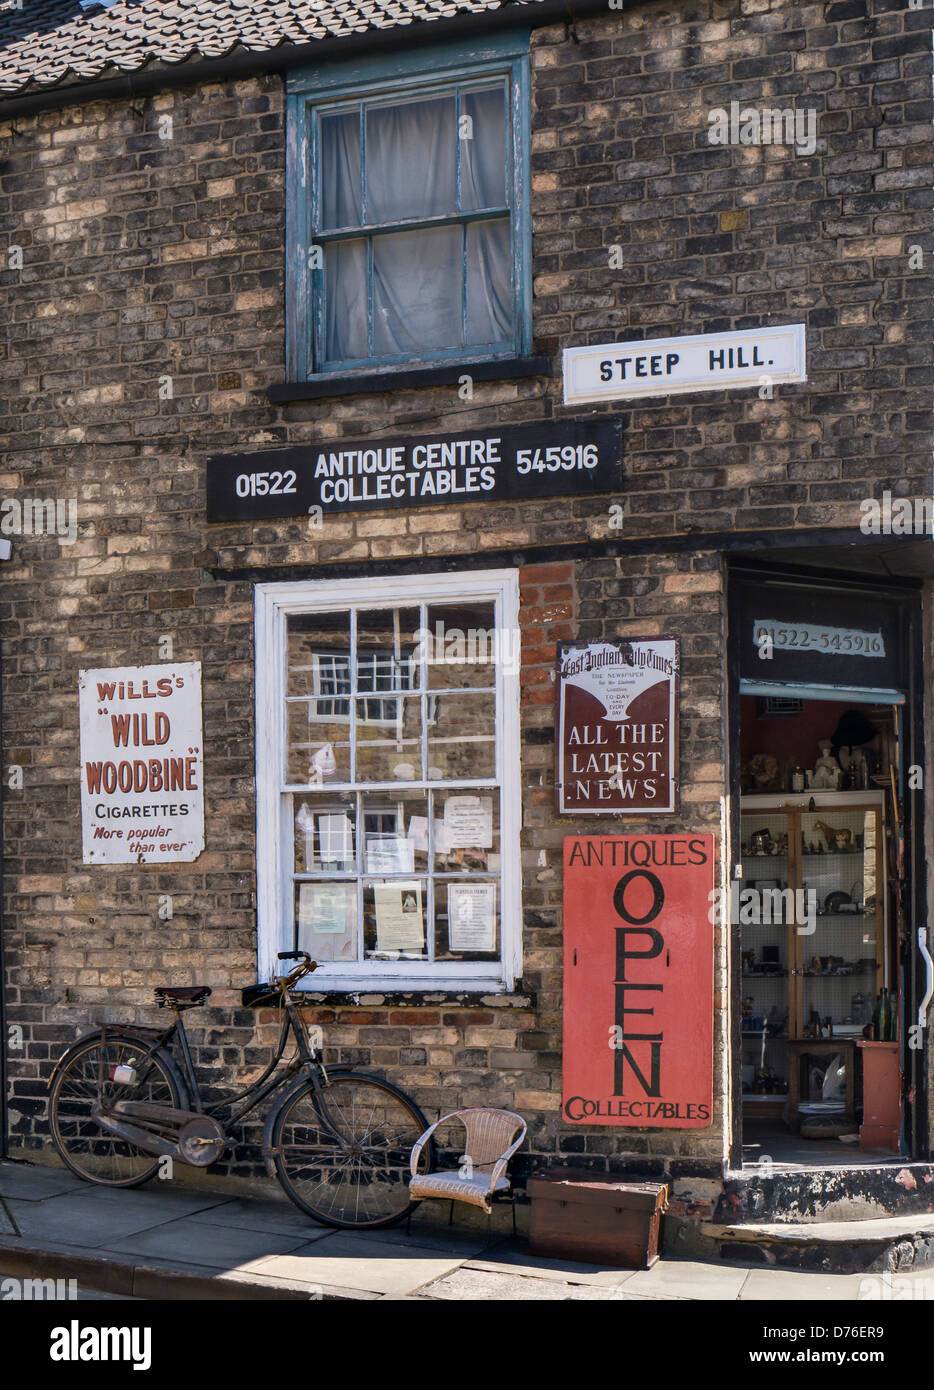 LINCOLN, UK - APRIL 20, 2013:  Exterior view of pretty Antique shop on Steep Hill Stock Photo